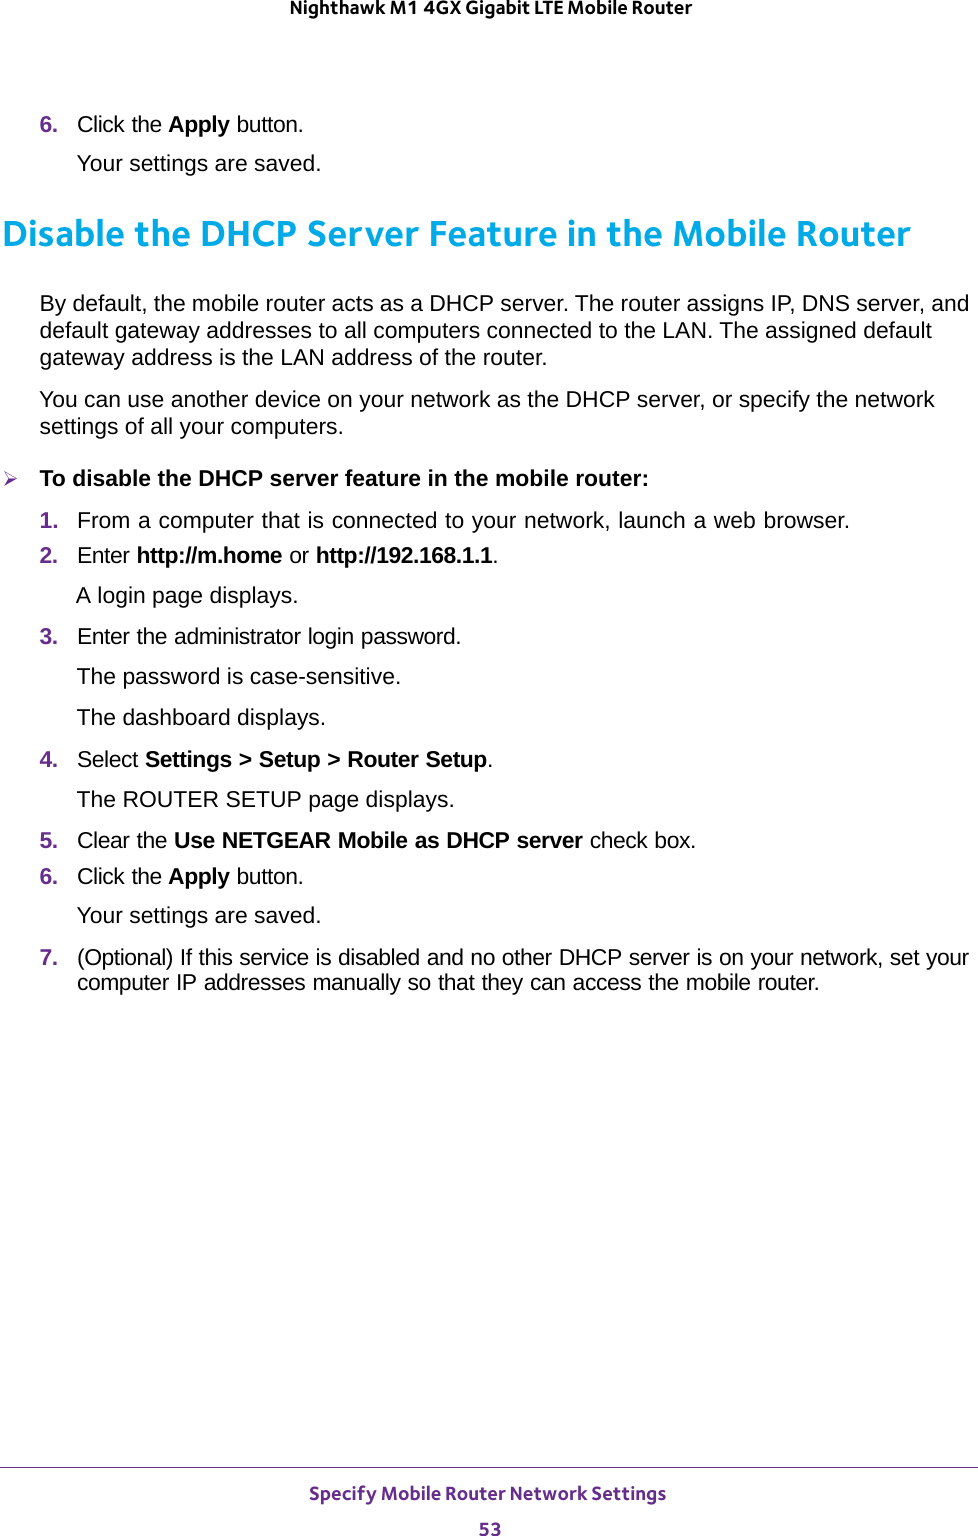 Specify Mobile Router Network Settings 53 Nighthawk M1 4GX Gigabit LTE Mobile Router6.  Click the Apply button.Your settings are saved.Disable the DHCP Server Feature in the Mobile RouterBy default, the mobile router acts as a DHCP server. The router assigns IP, DNS server, and default gateway addresses to all computers connected to the LAN. The assigned default gateway address is the LAN address of the router.You can use another device on your network as the DHCP server, or specify the network settings of all your computers.To disable the DHCP server feature in the mobile router:1.  From a computer that is connected to your network, launch a web browser.2.  Enter http://m.home or http://192.168.1.1.A login page displays.3.  Enter the administrator login password.The password is case-sensitive.The dashboard displays.4.  Select Settings &gt; Setup &gt; Router Setup.The ROUTER SETUP page displays.5.  Clear the Use NETGEAR Mobile as DHCP server check box.6.  Click the Apply button.Your settings are saved.7.  (Optional) If this service is disabled and no other DHCP server is on your network, set your computer IP addresses manually so that they can access the mobile router.